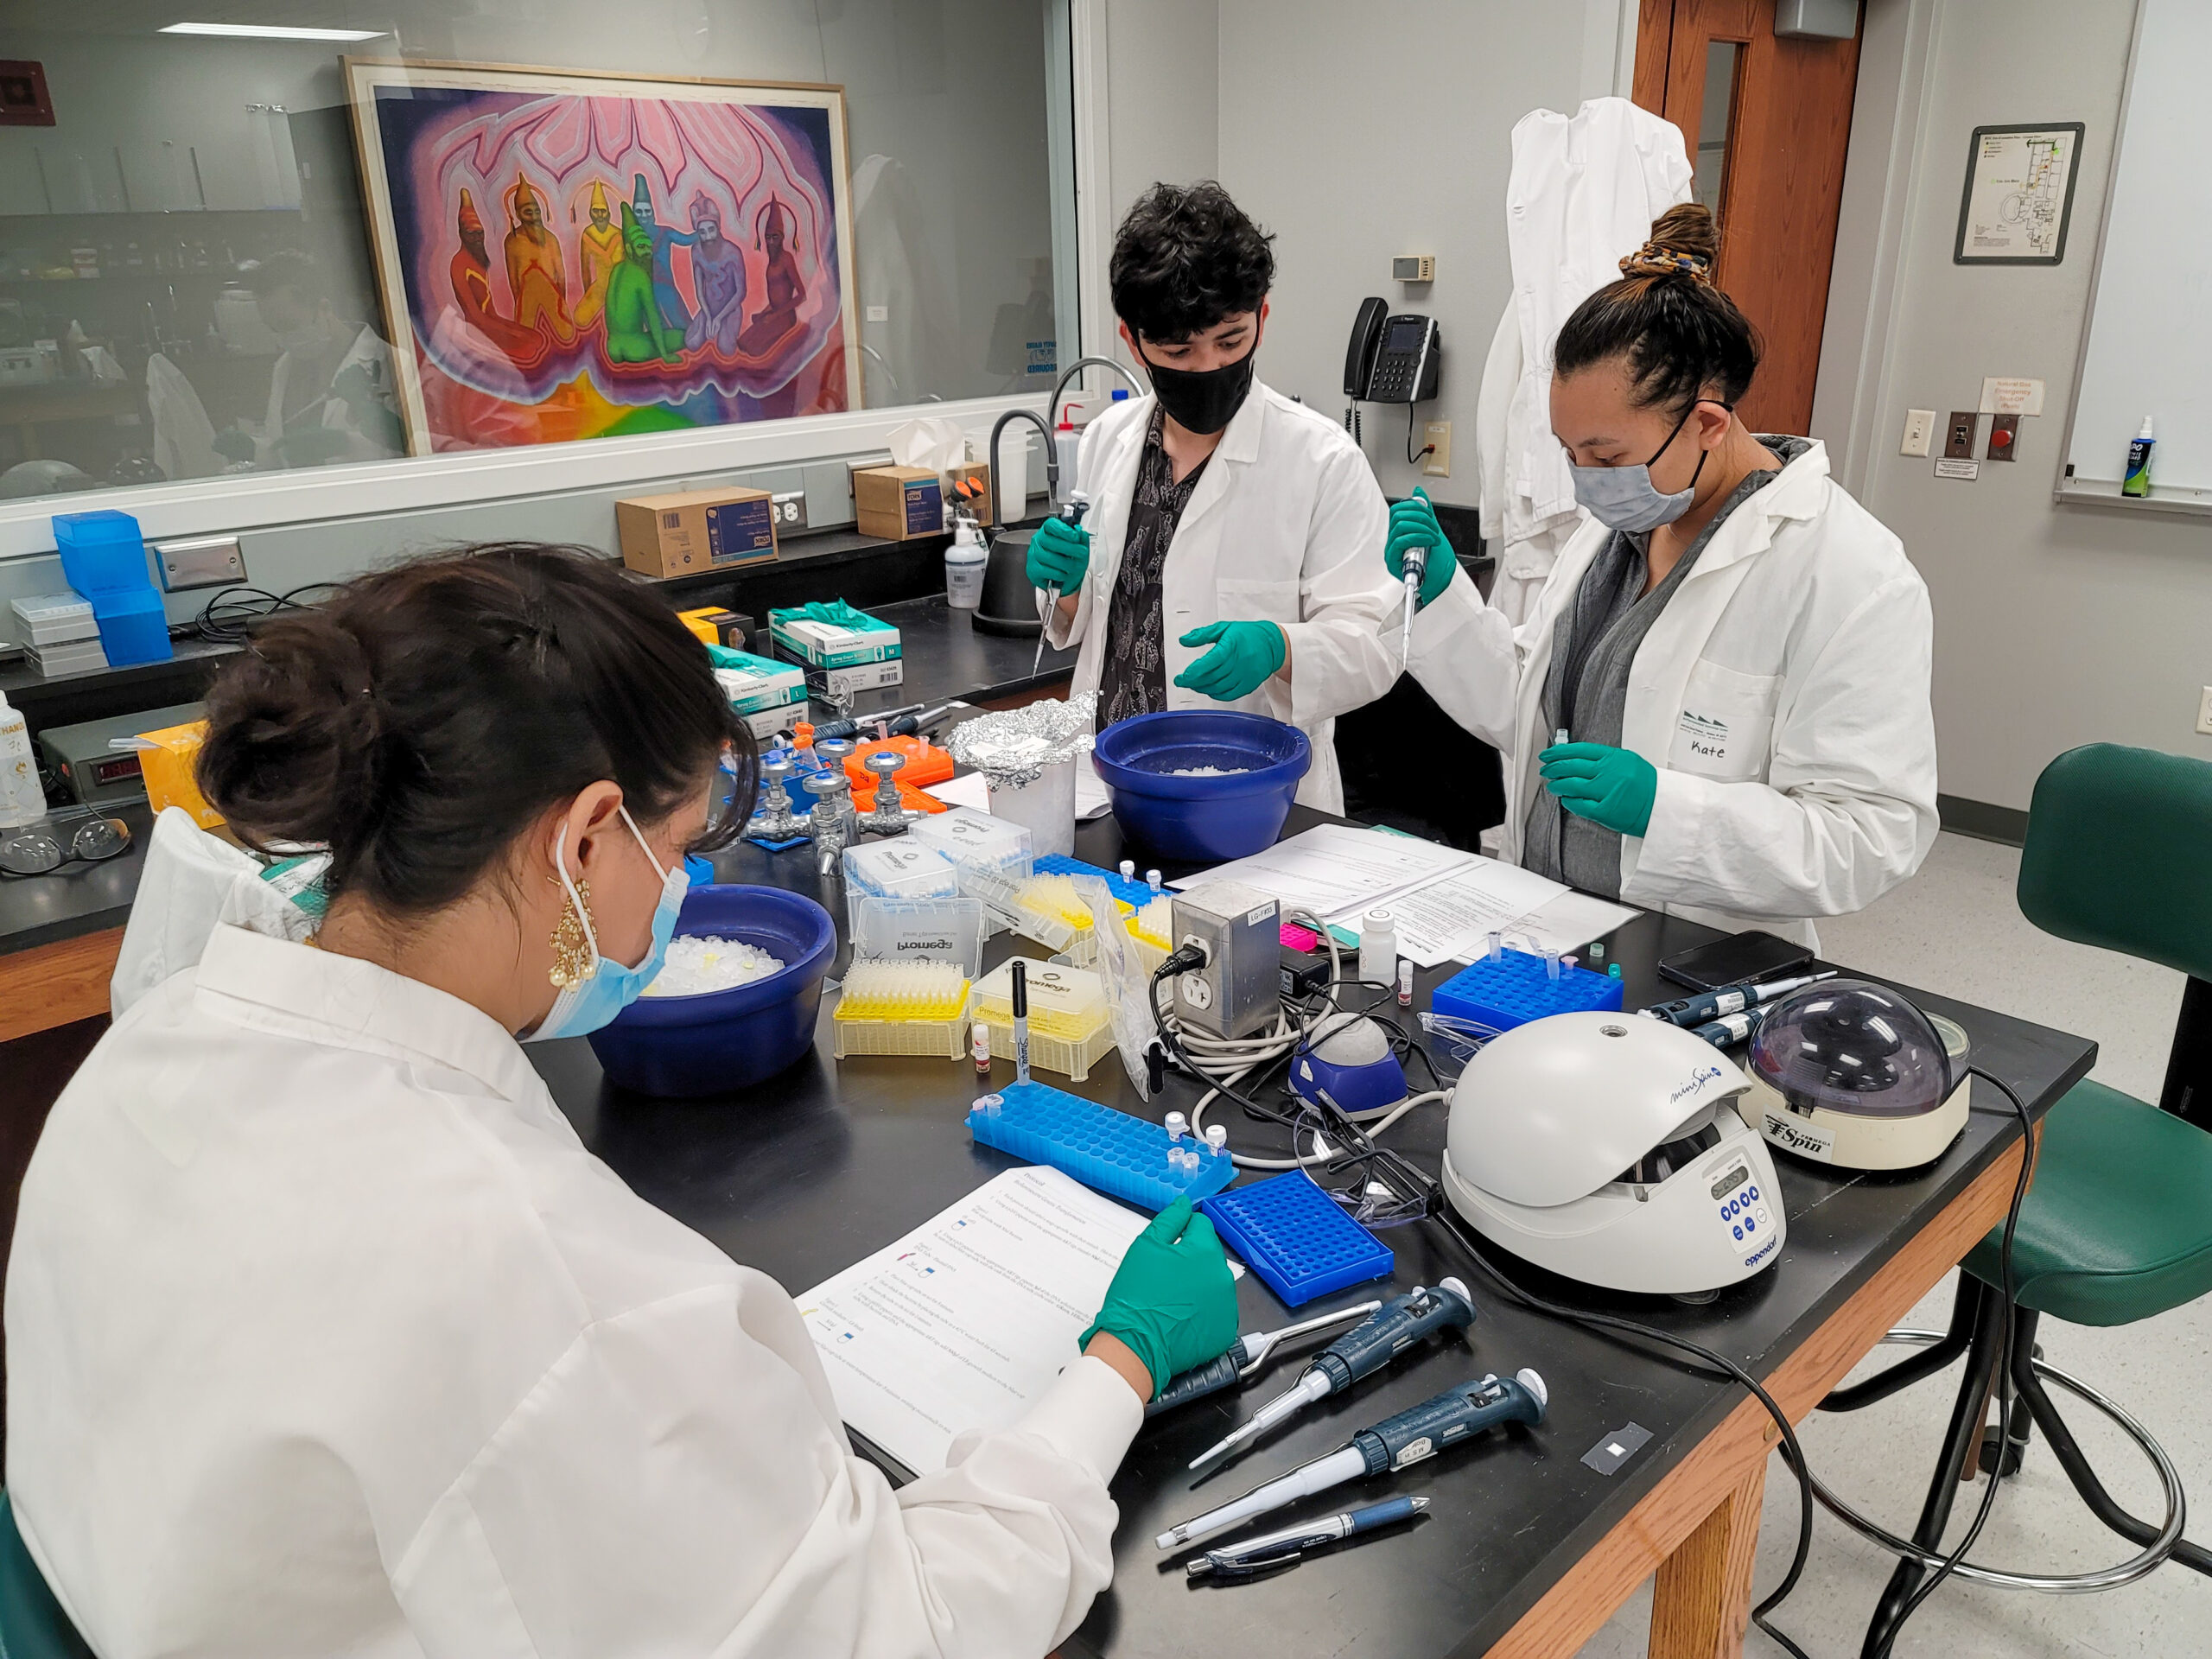 Three students wearing white lab coats, face masks, and green surgical gloves work at a lab table.